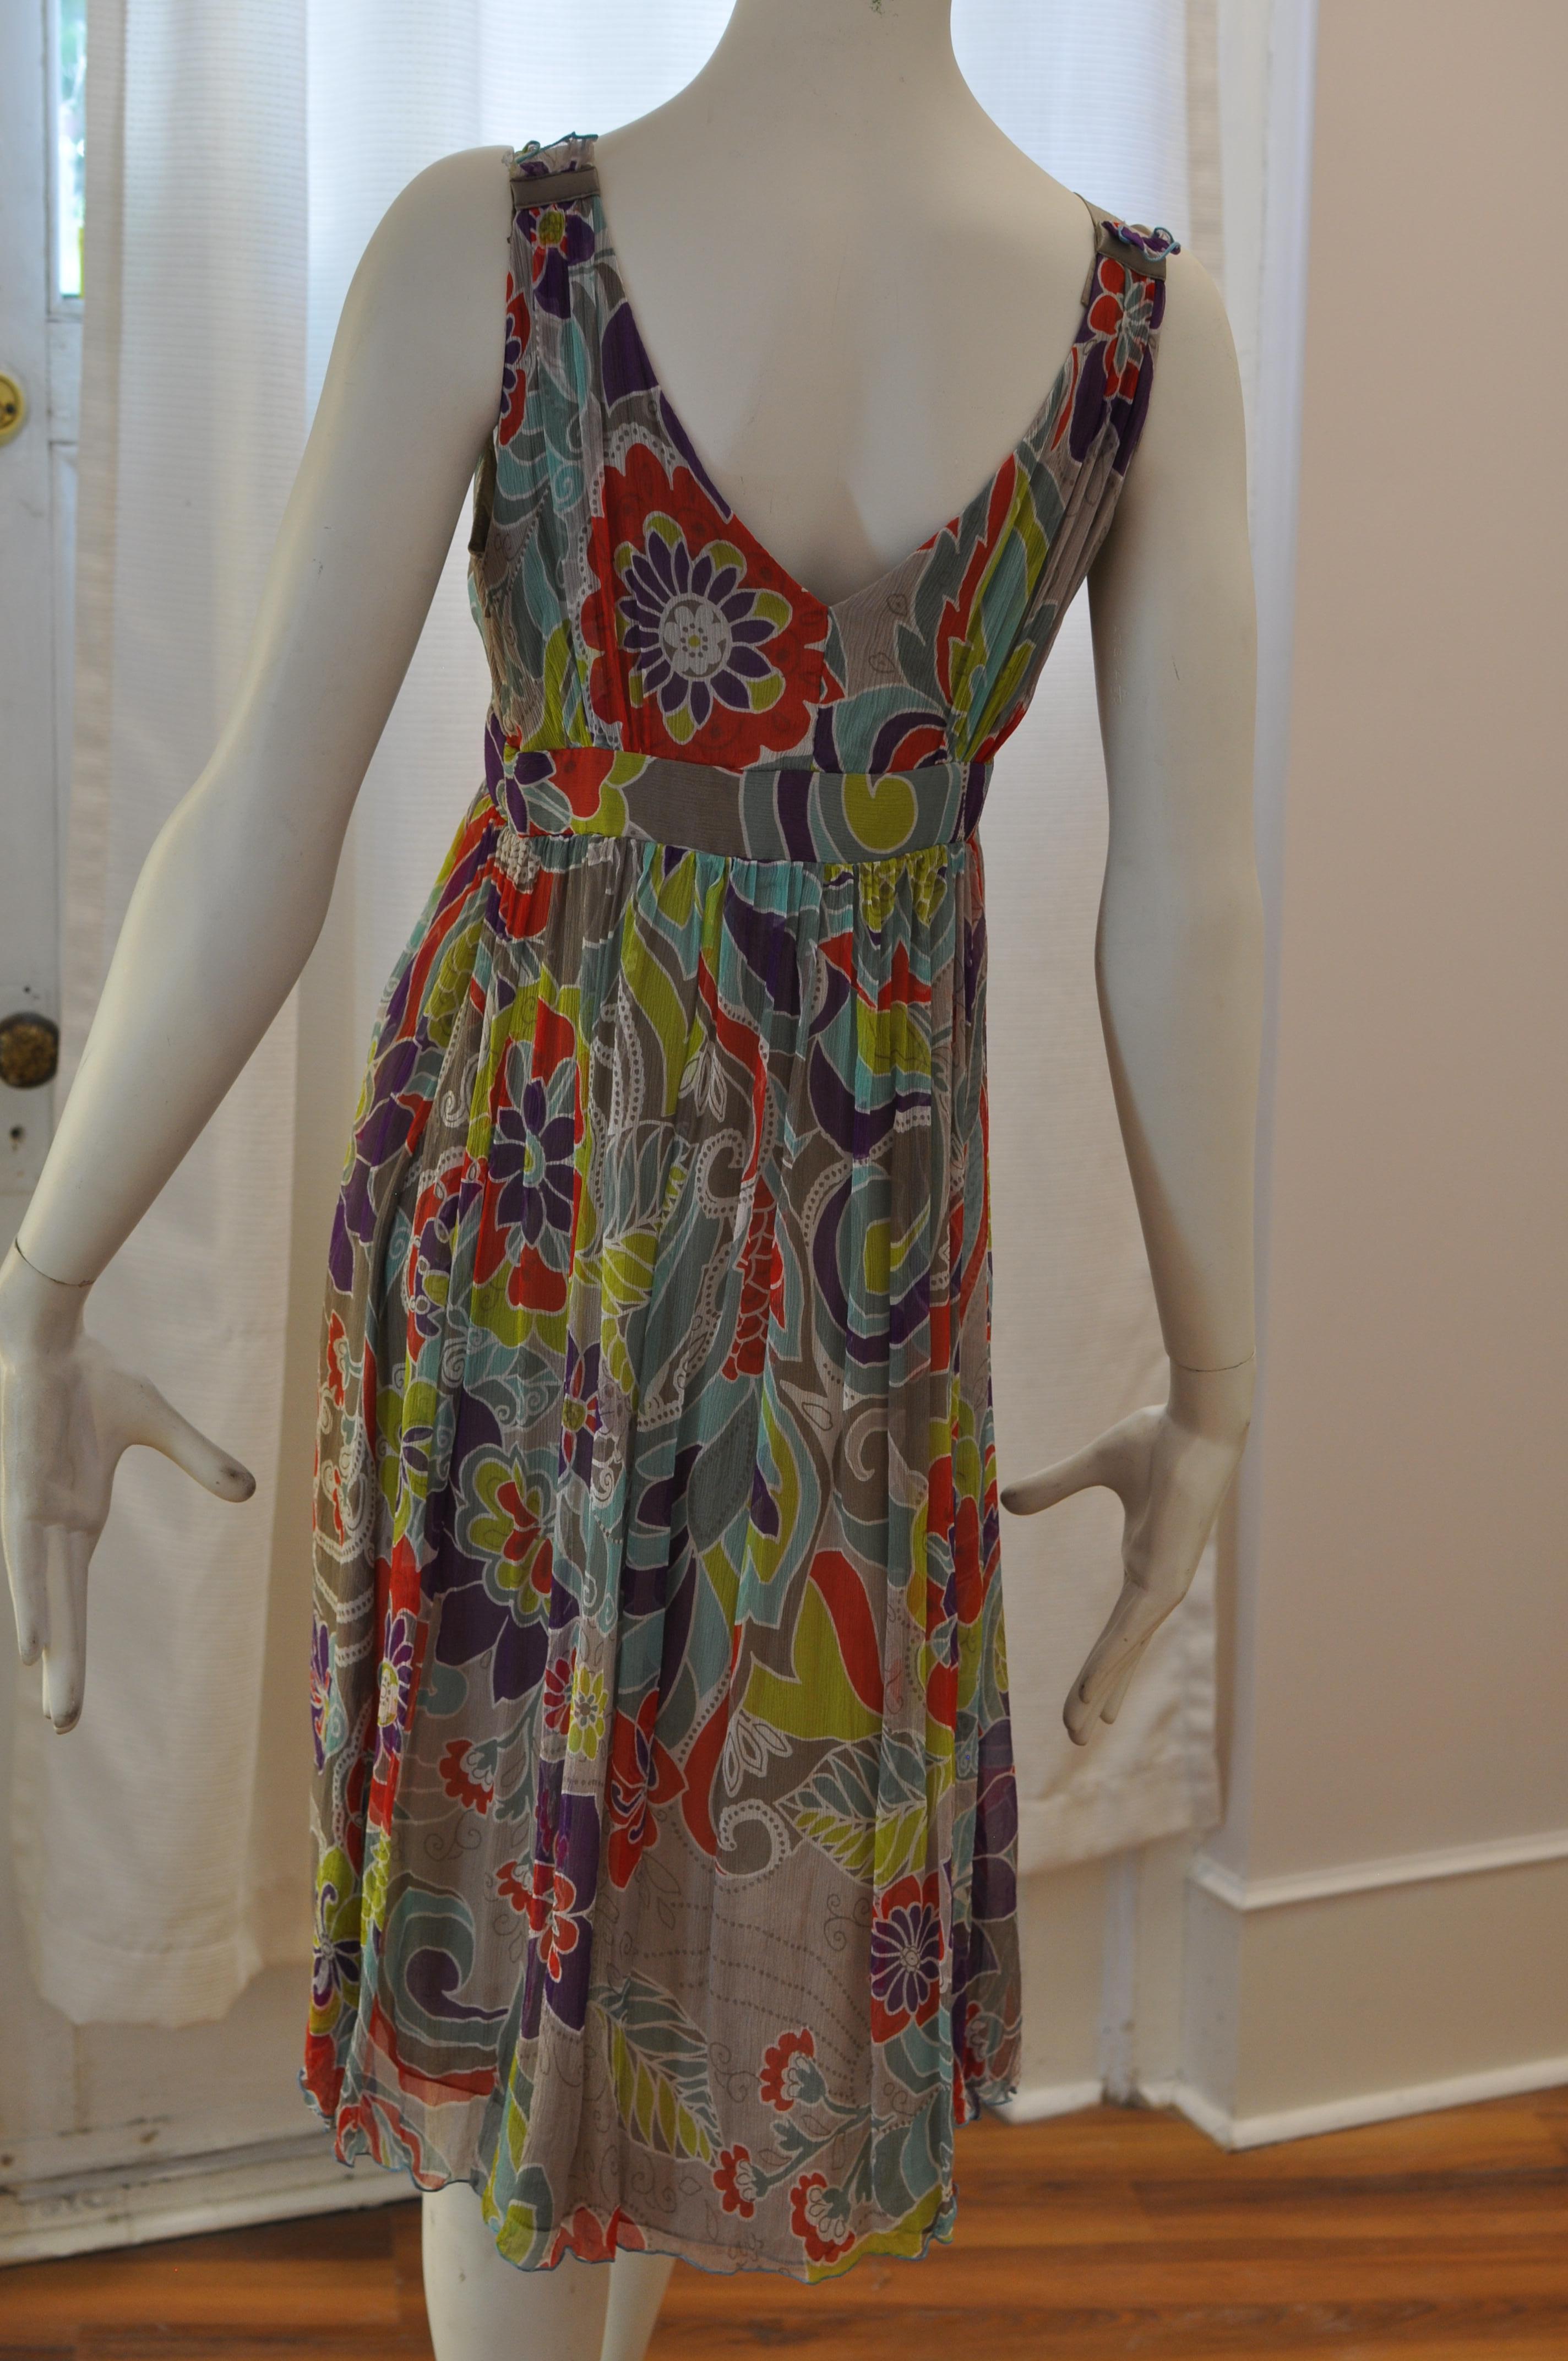 Lovely summer dress with a bold and colorful floral pattern. Nice pleated detail above the bust line; band on the waist line and interesting strap detail.

Closure is by a side zipper.

This dress is in excellent condition.